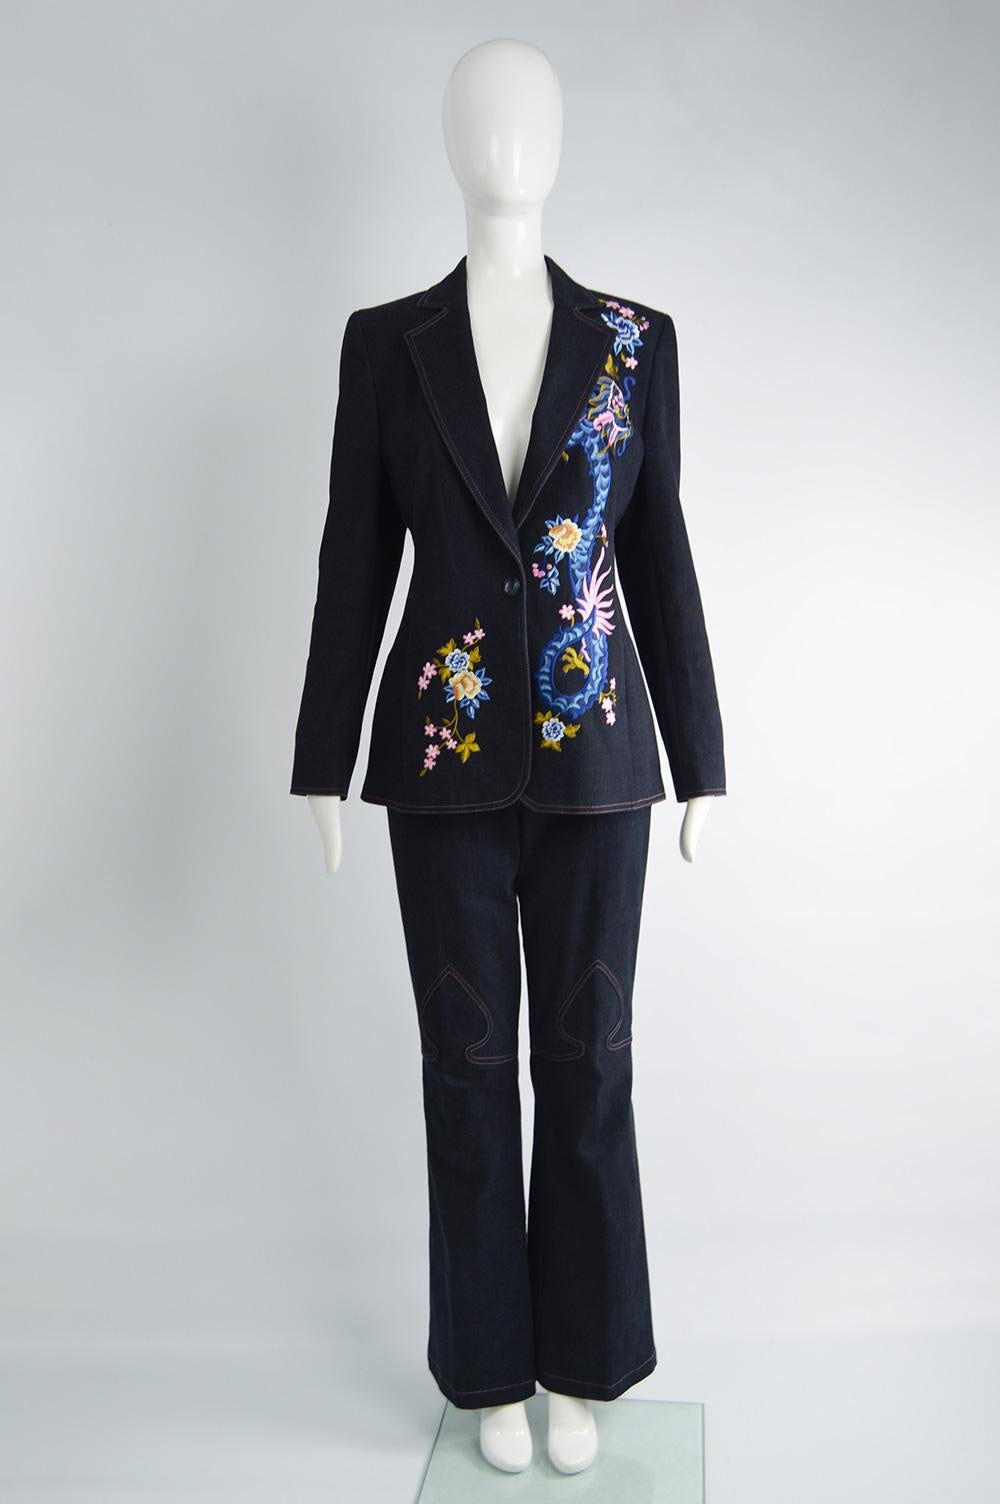 A fabulous vintage womens two piece blazer and bootleg jeans suit by Escada. In a dark blue denim with beautiful floral and dragon embroidery on the jacket and an interesting layered/ insert detail to the leg of the jeans. 

Size: Marked EU 38 which